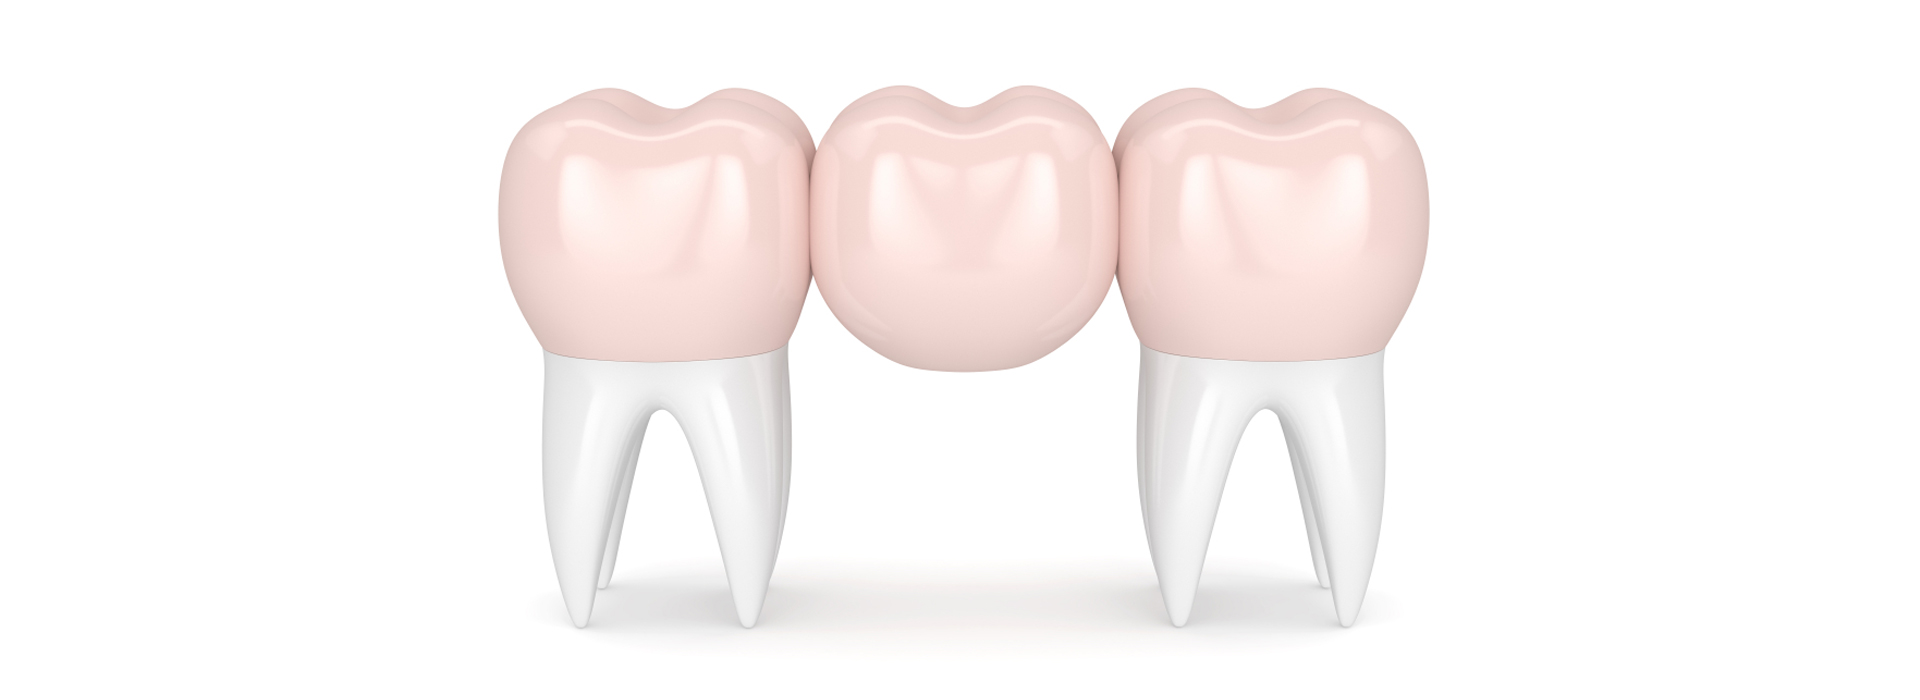 Dental Bridge – Types, Costs, Problems & Difference To Implants